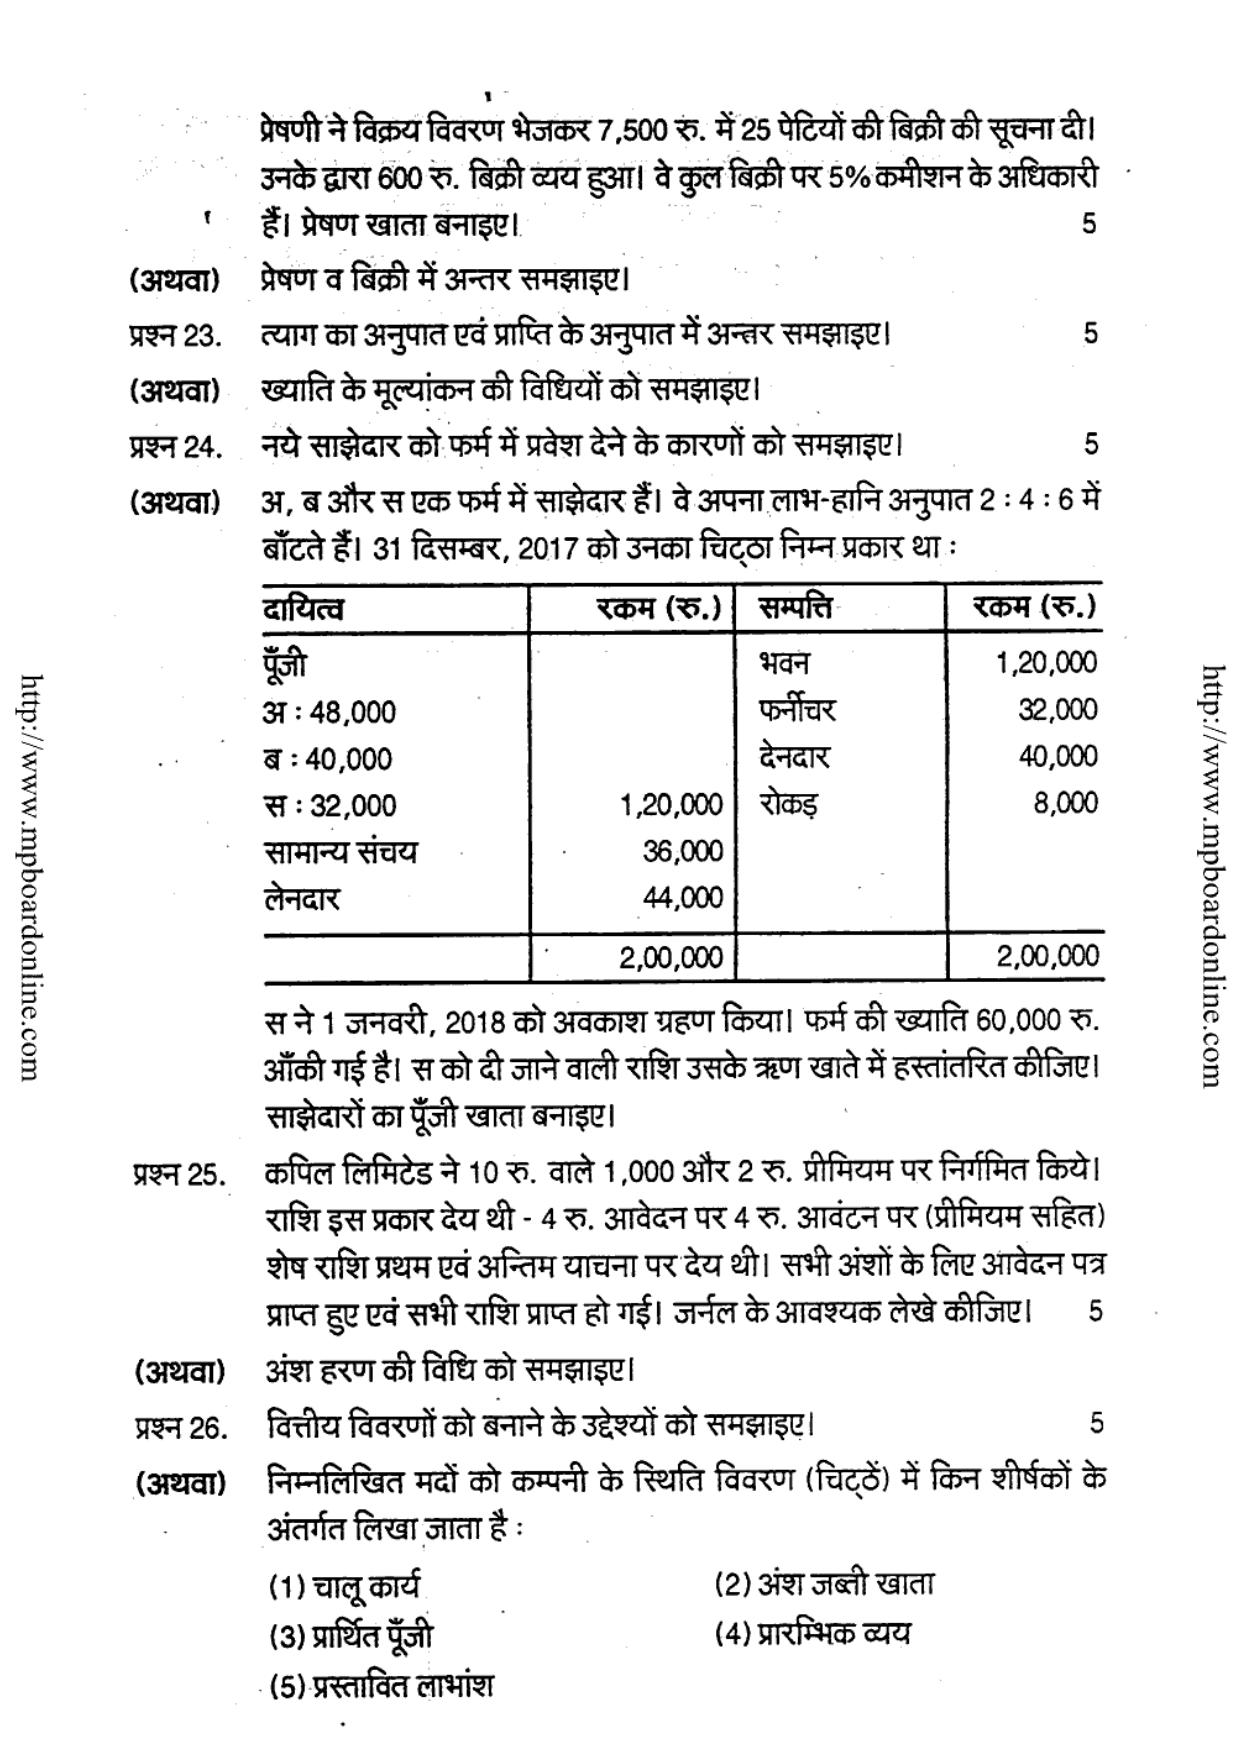 MP Board Class 12 Book Keeping And Accountancy 2018 Question Paper - Page 12